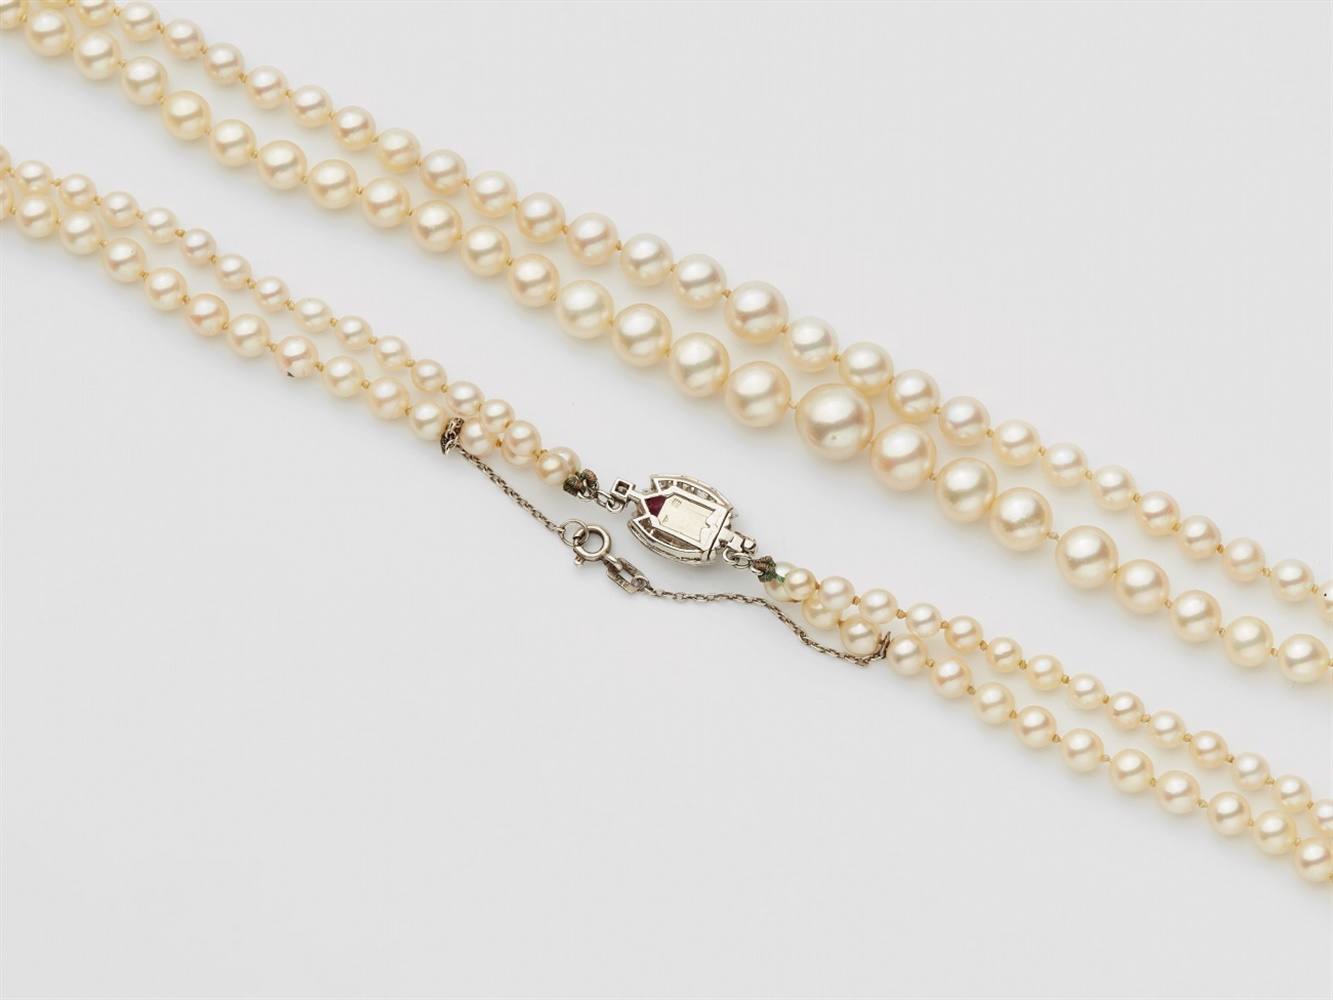 A French pearl necklace with a diamond and rubelite claspA two-stranded pearl necklace comprised - Image 2 of 3